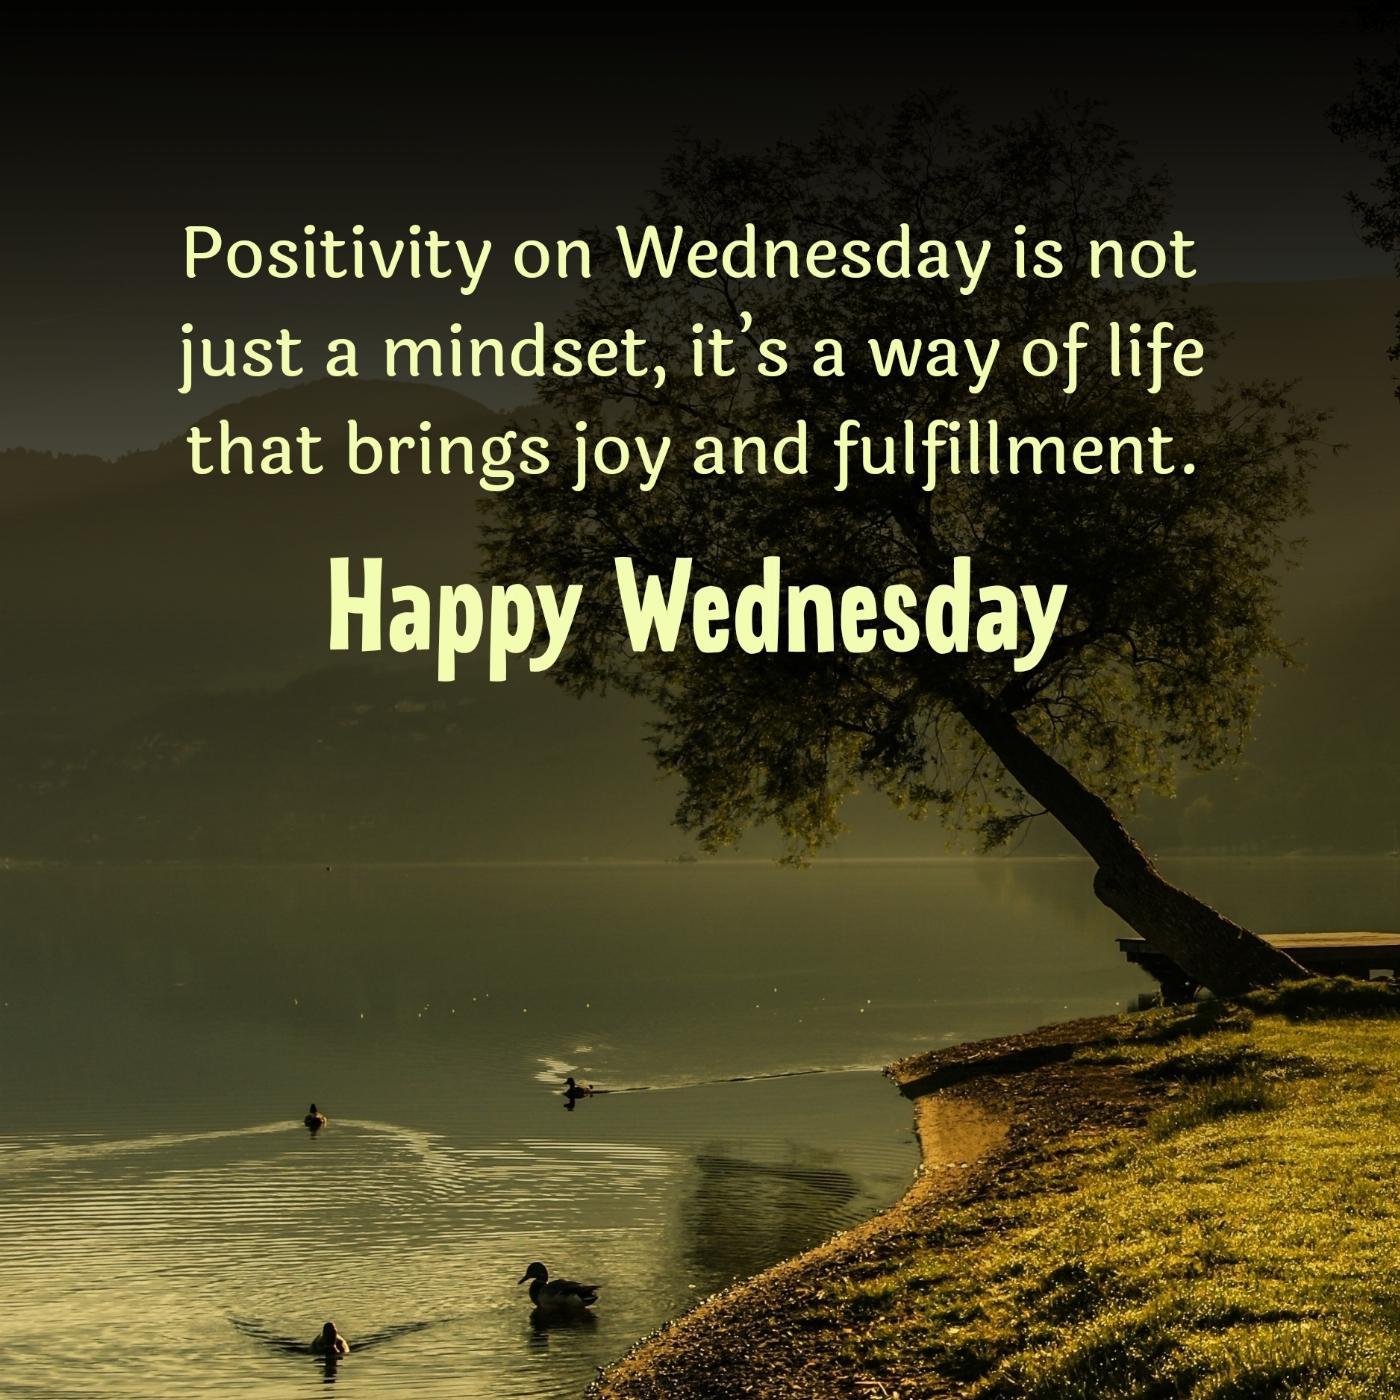 Positivity on Wednesday is not just a mindset